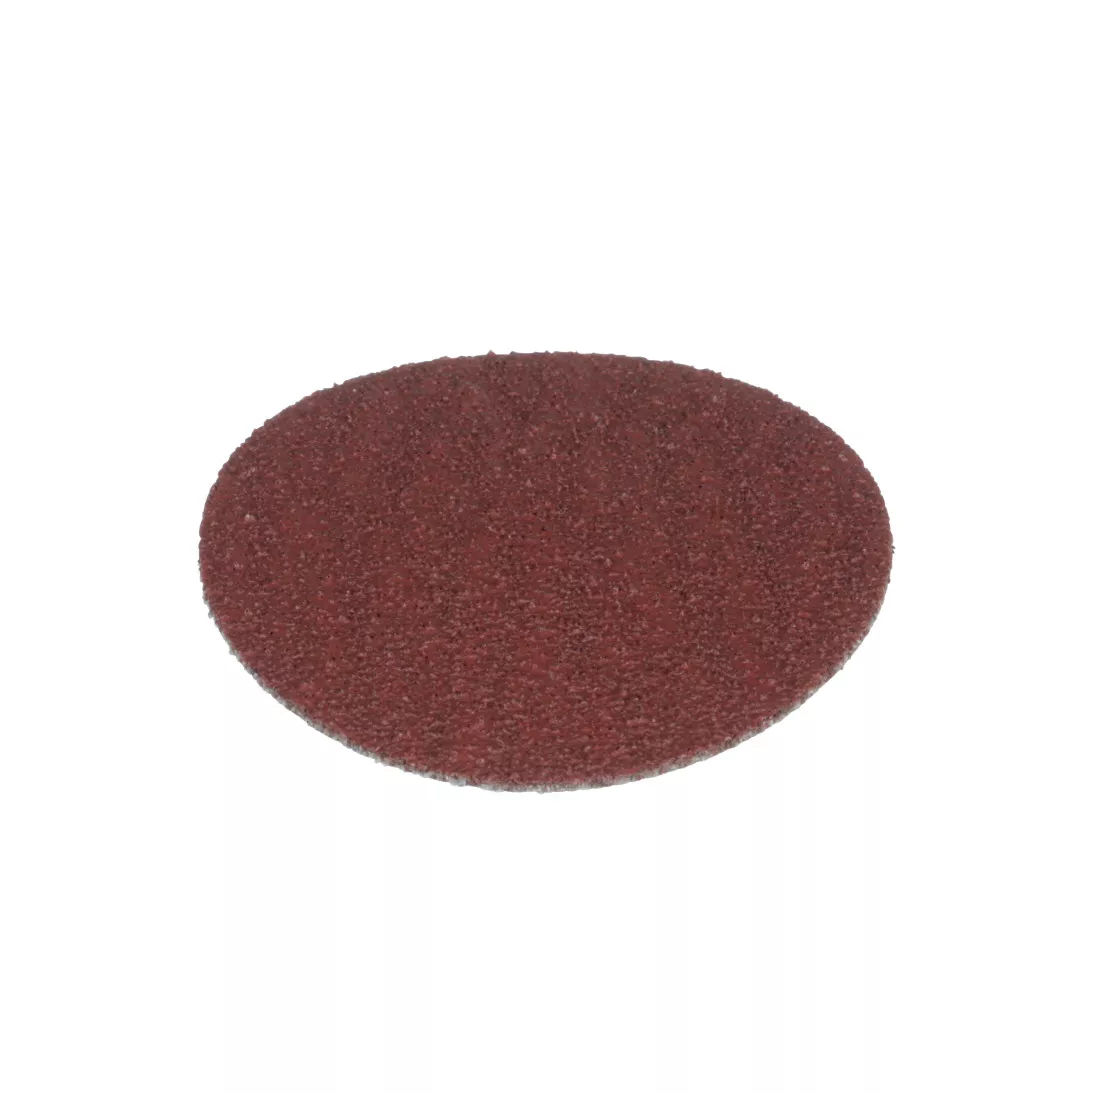 Standard Abrasives™ Quick Change Aluminum Oxide Extra 2 Ply Disc,
592455, 60, TR, Light Brown, 2 in, Die Q200P, 50/inner, 200/case